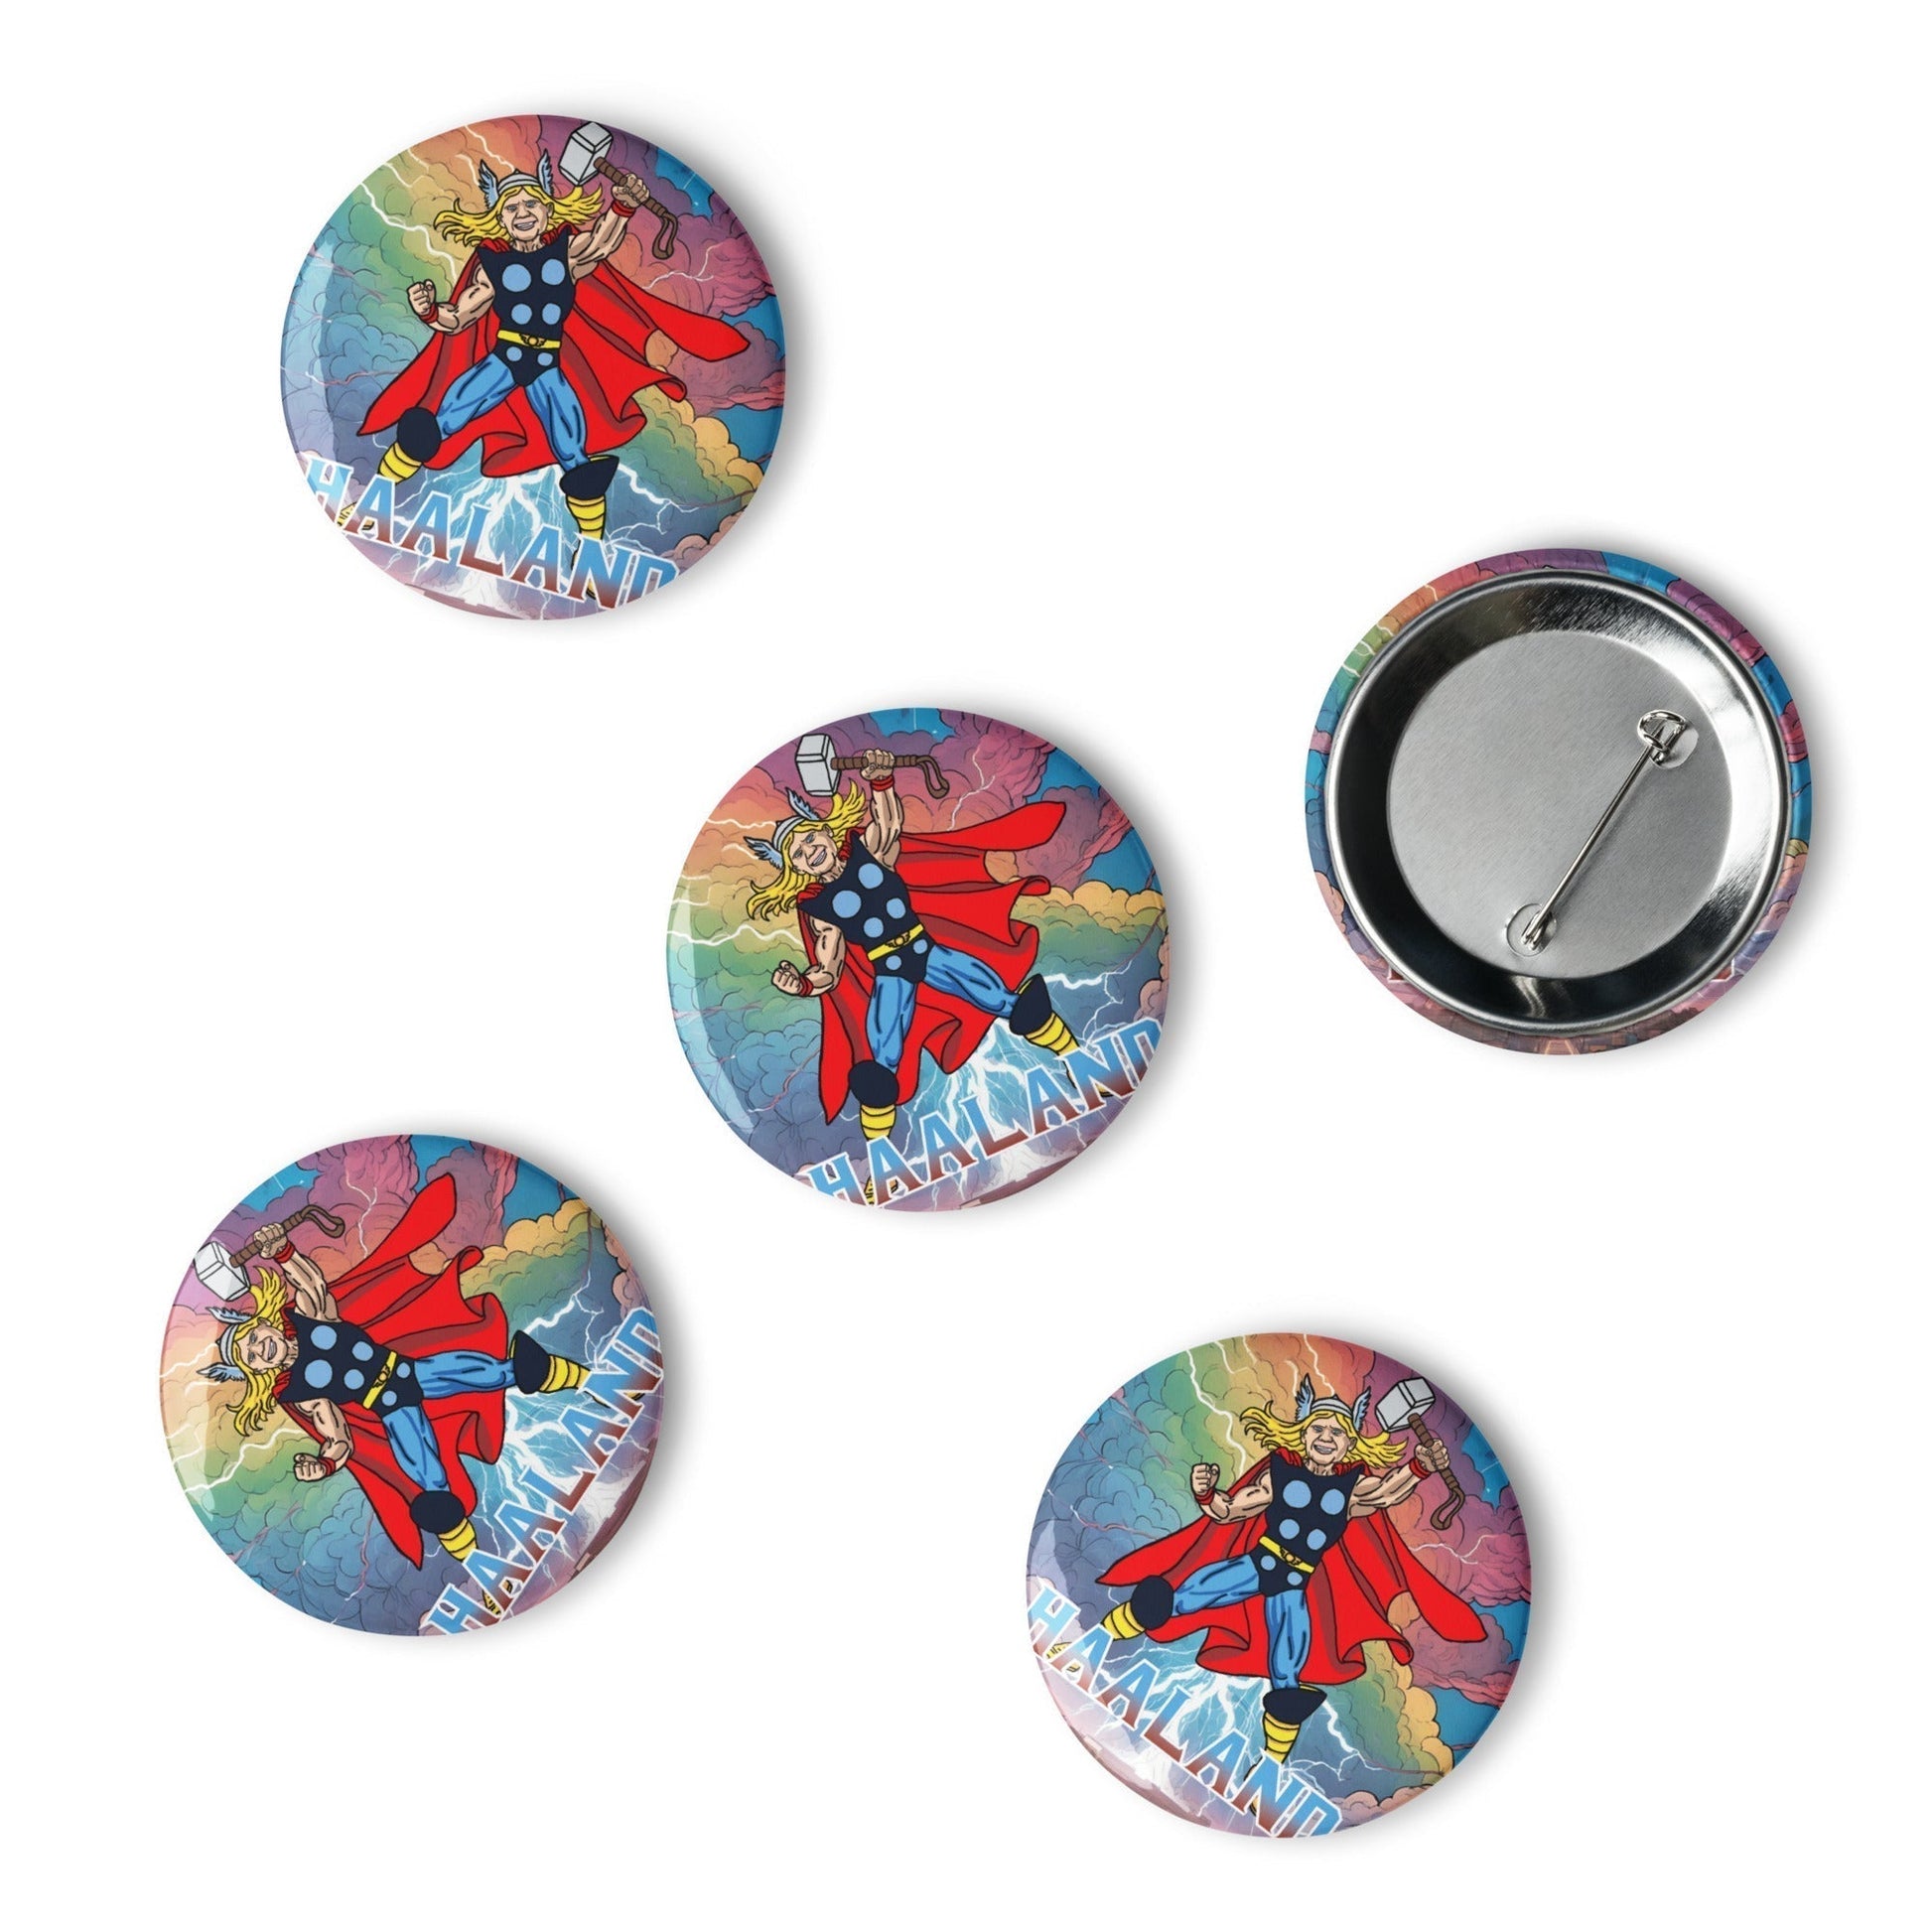 Erling Haaland Thor Avenger Manchester City Funny Football/ Soccer Meme Set of pin buttons Next Cult Brand Erling Haaland, Football, Manchester City, Thor